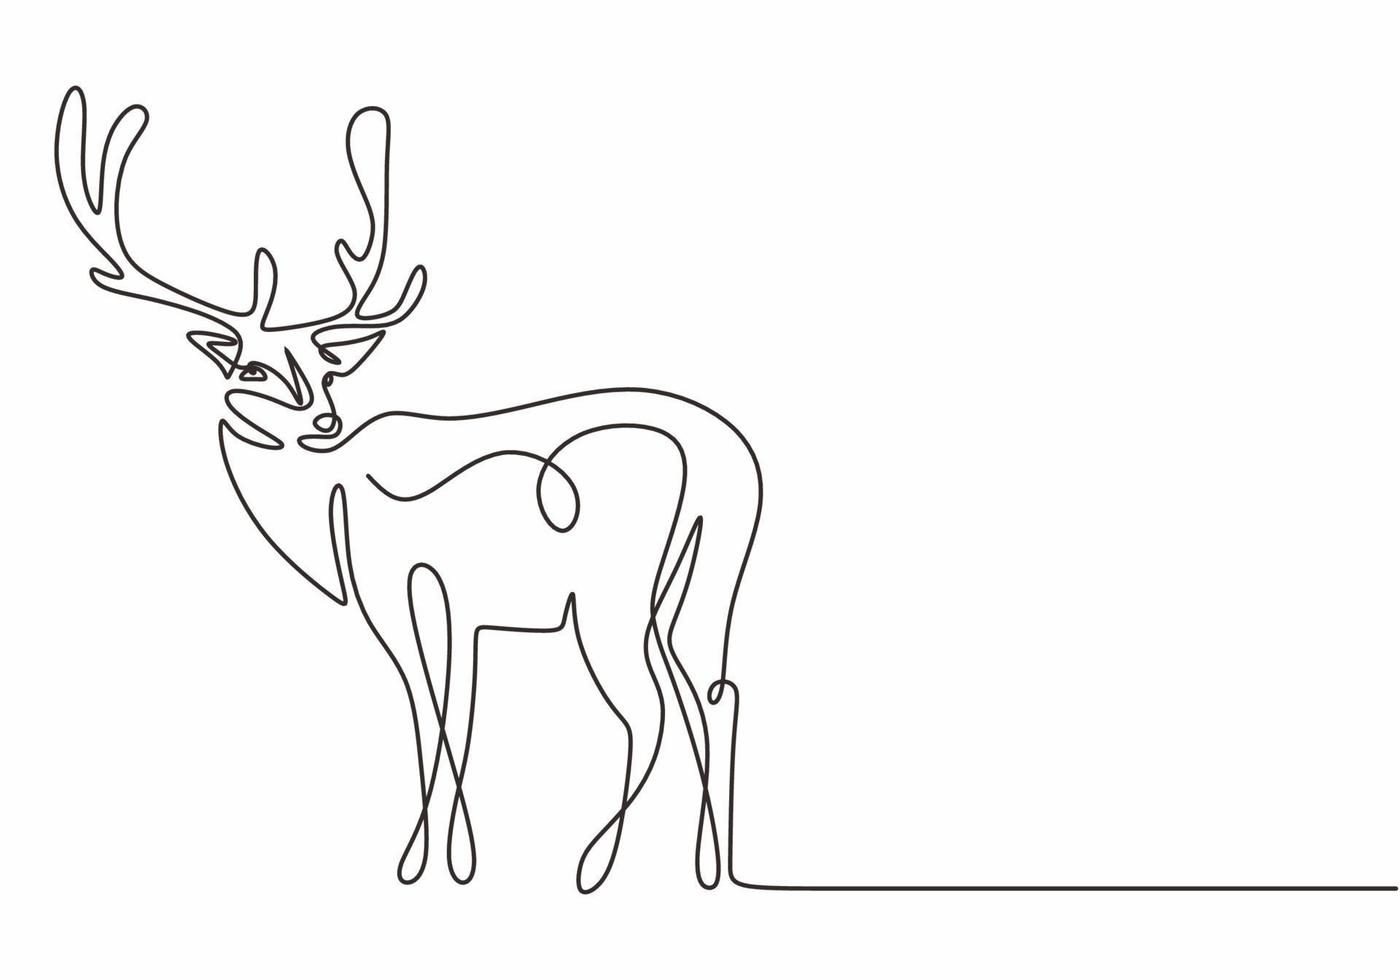 One line design silhouette of deer. Continuous hand drawn vector